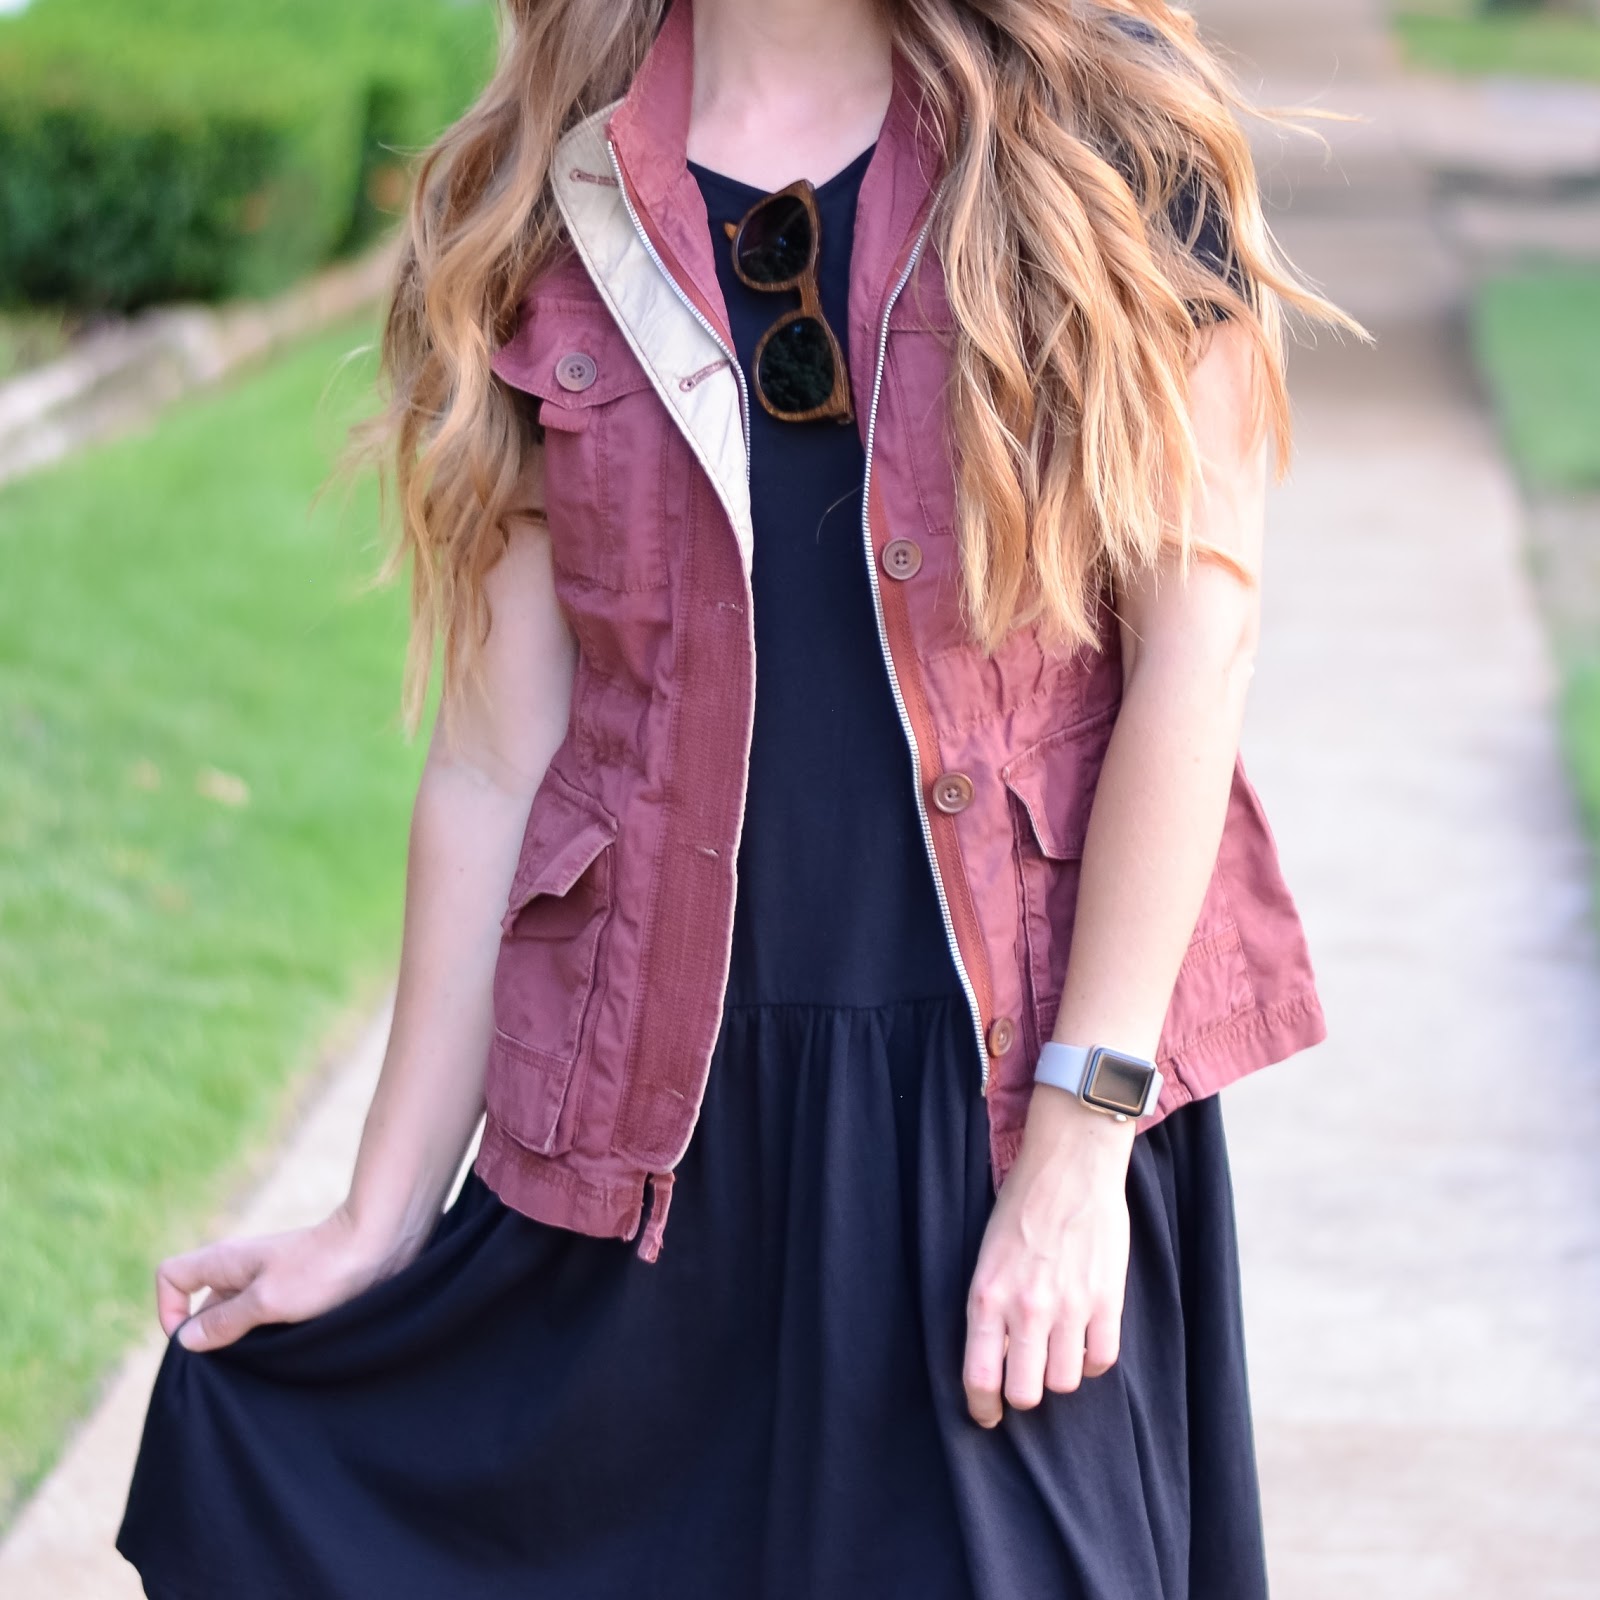 Sincerely Jenna Marie | A St. Louis Life and Style Blog: A Dress with ...